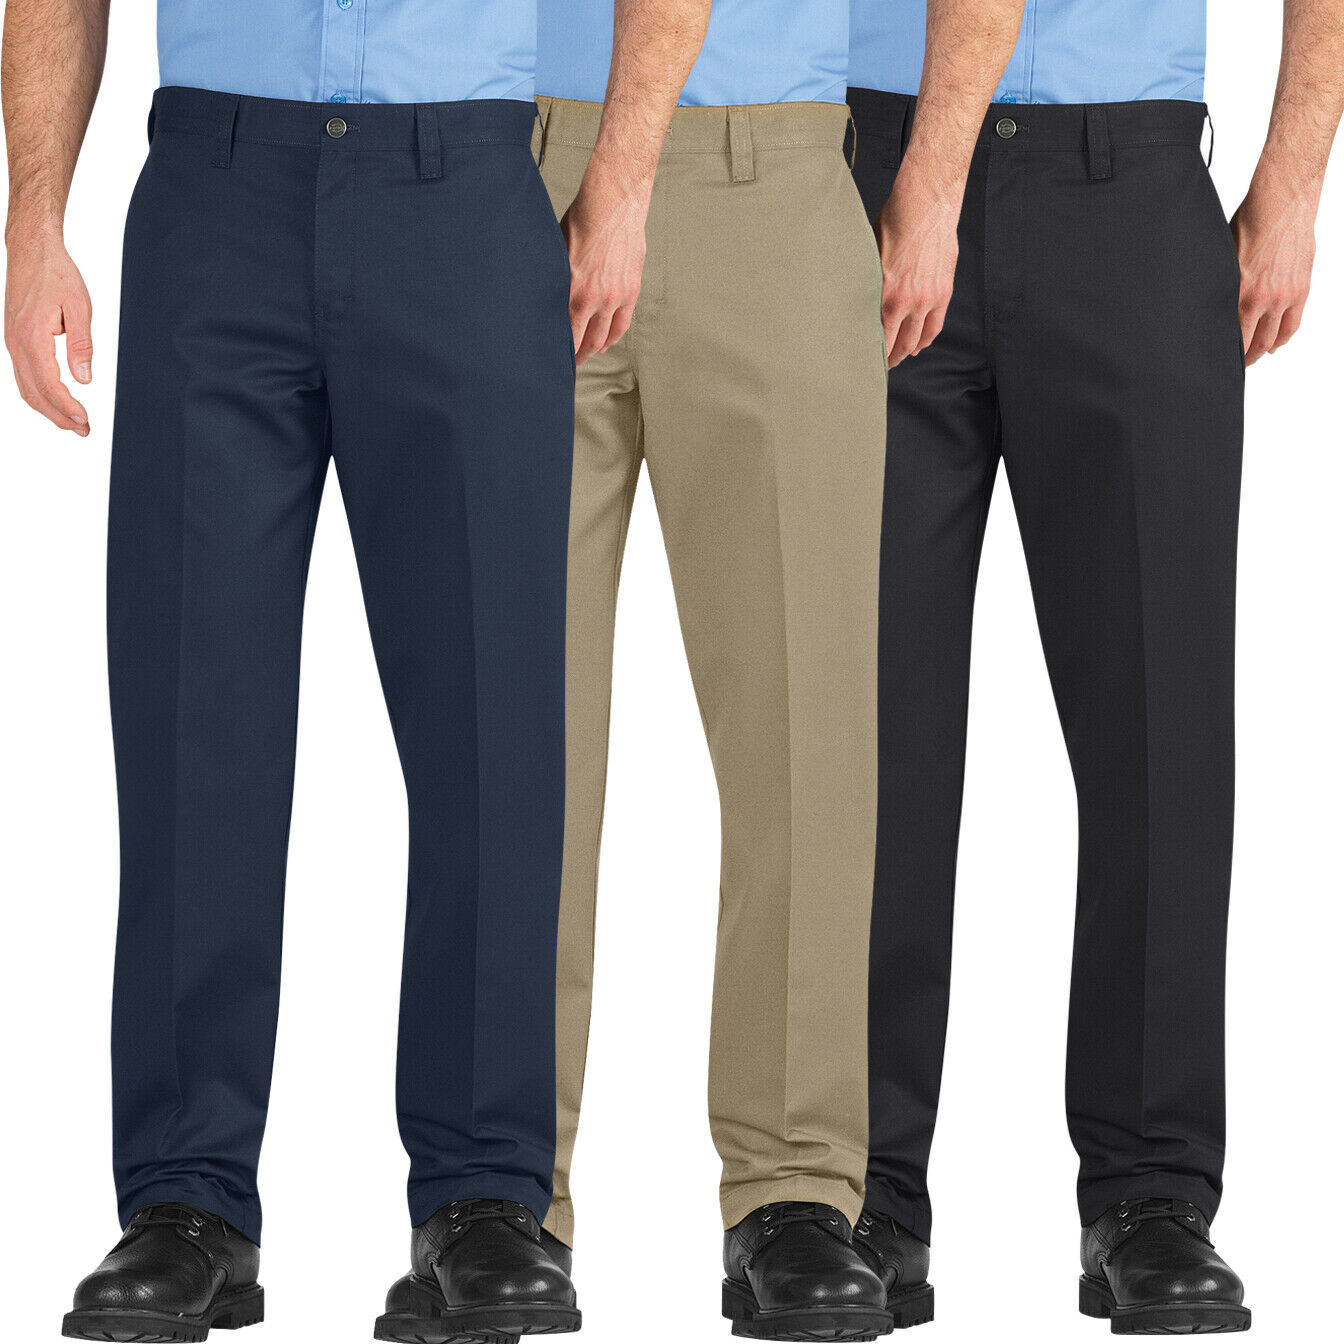 9 Best Work Pants For Electricians | With Images And Prices | Tool Listings